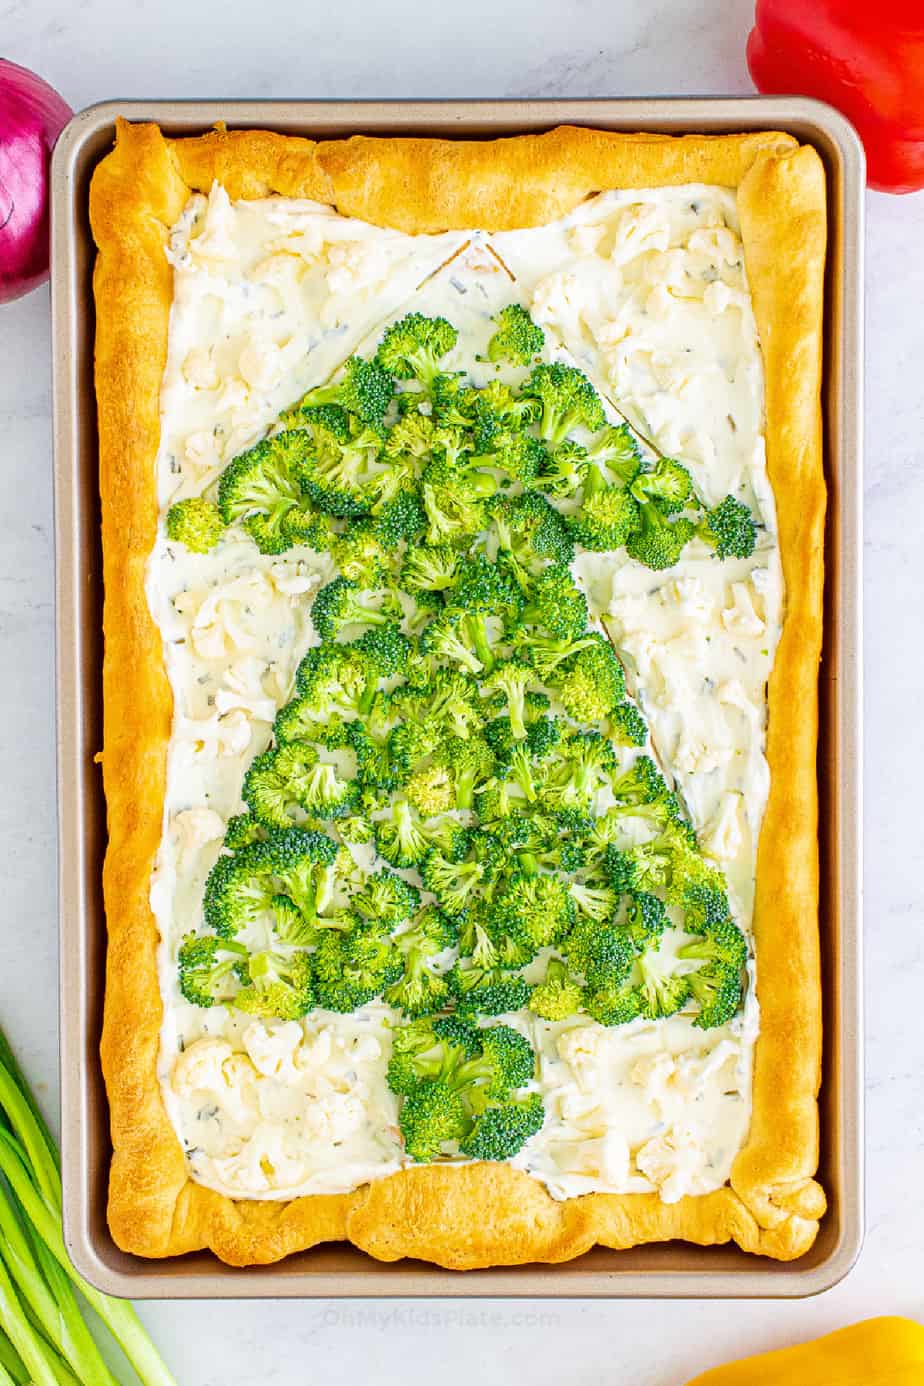 Decorating the Christmas tree on the veggie pizza with broccoli and cauliflower for the white spaces. from overhead